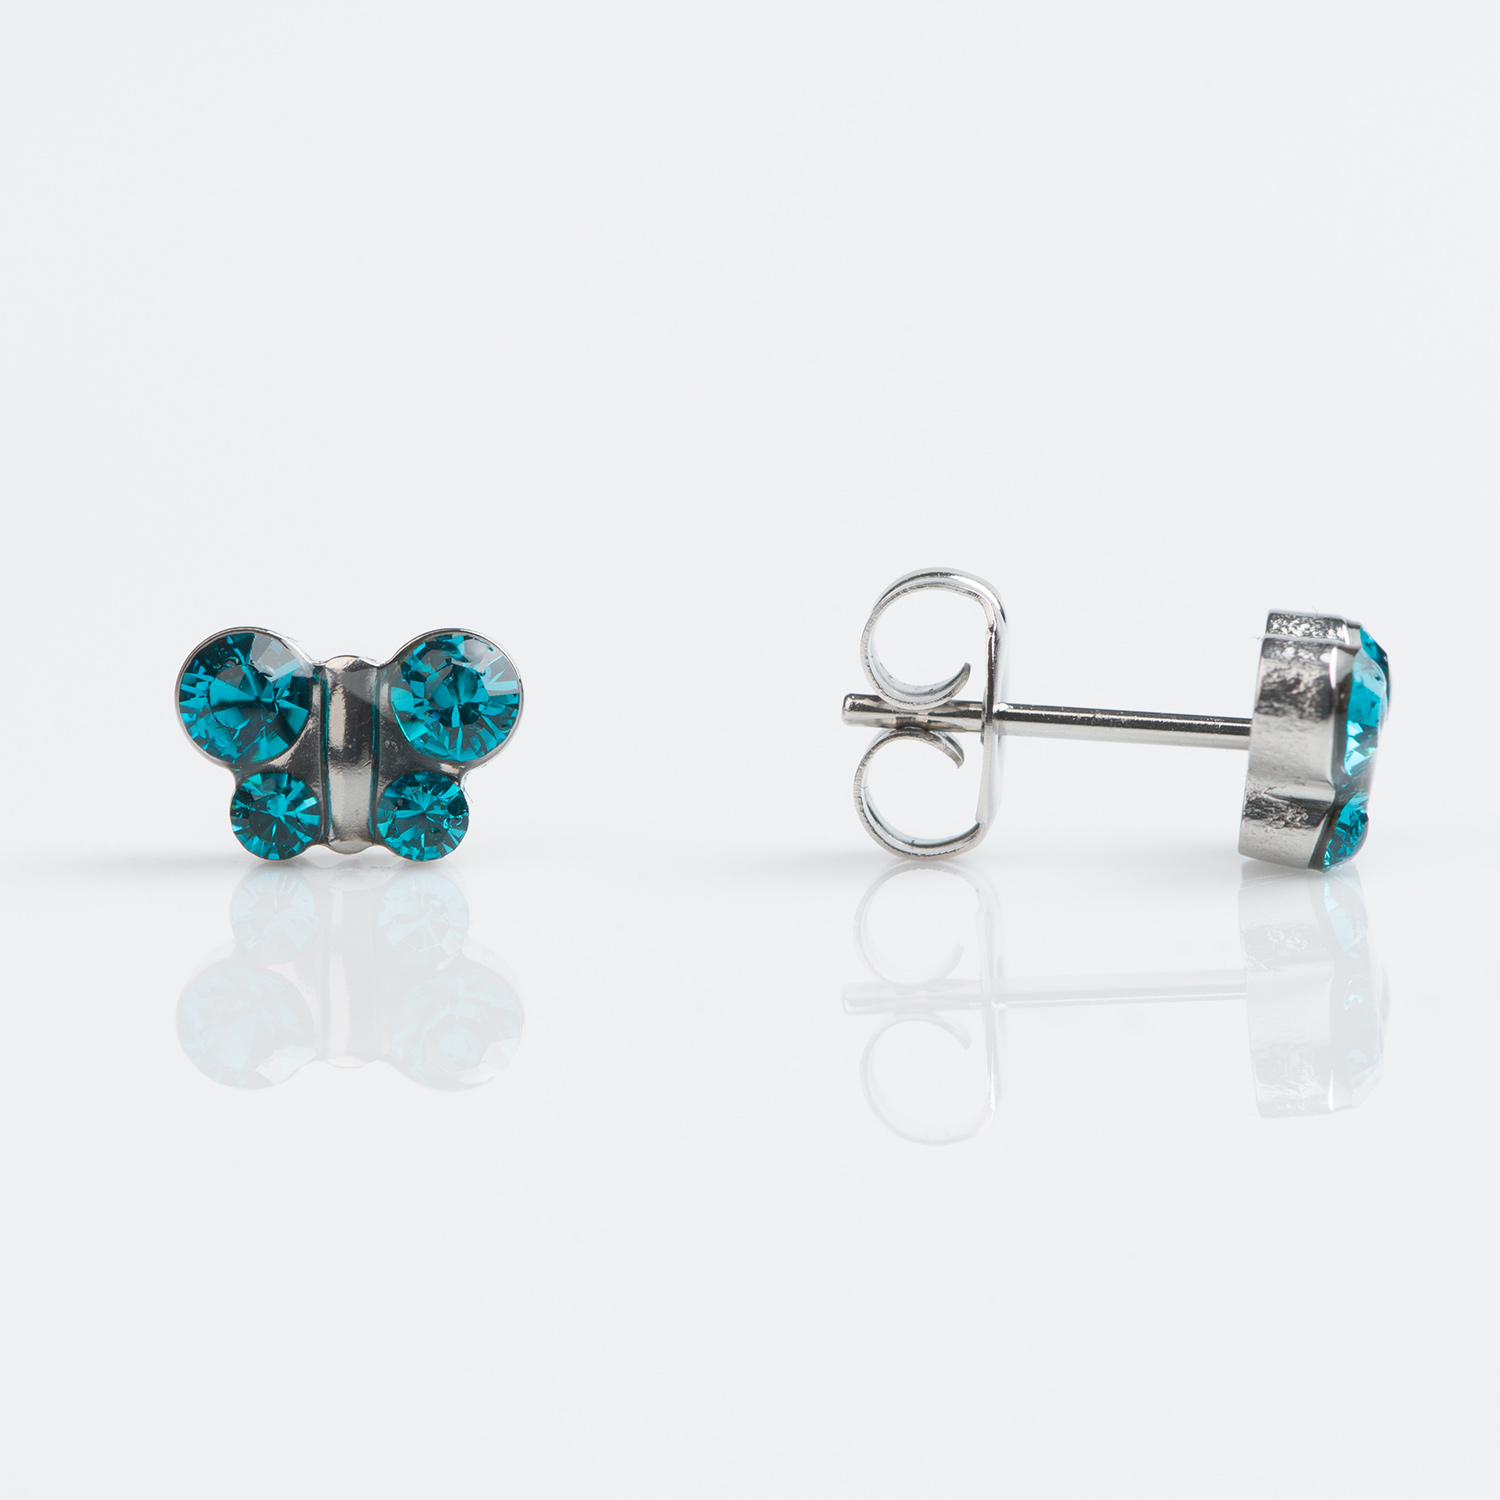 Beautiful pair of Hypoallergenic Studex Sensitive Butterfly Stud Earrings Stainless Steel December Blue Zircon, that are great for sensitive ears.